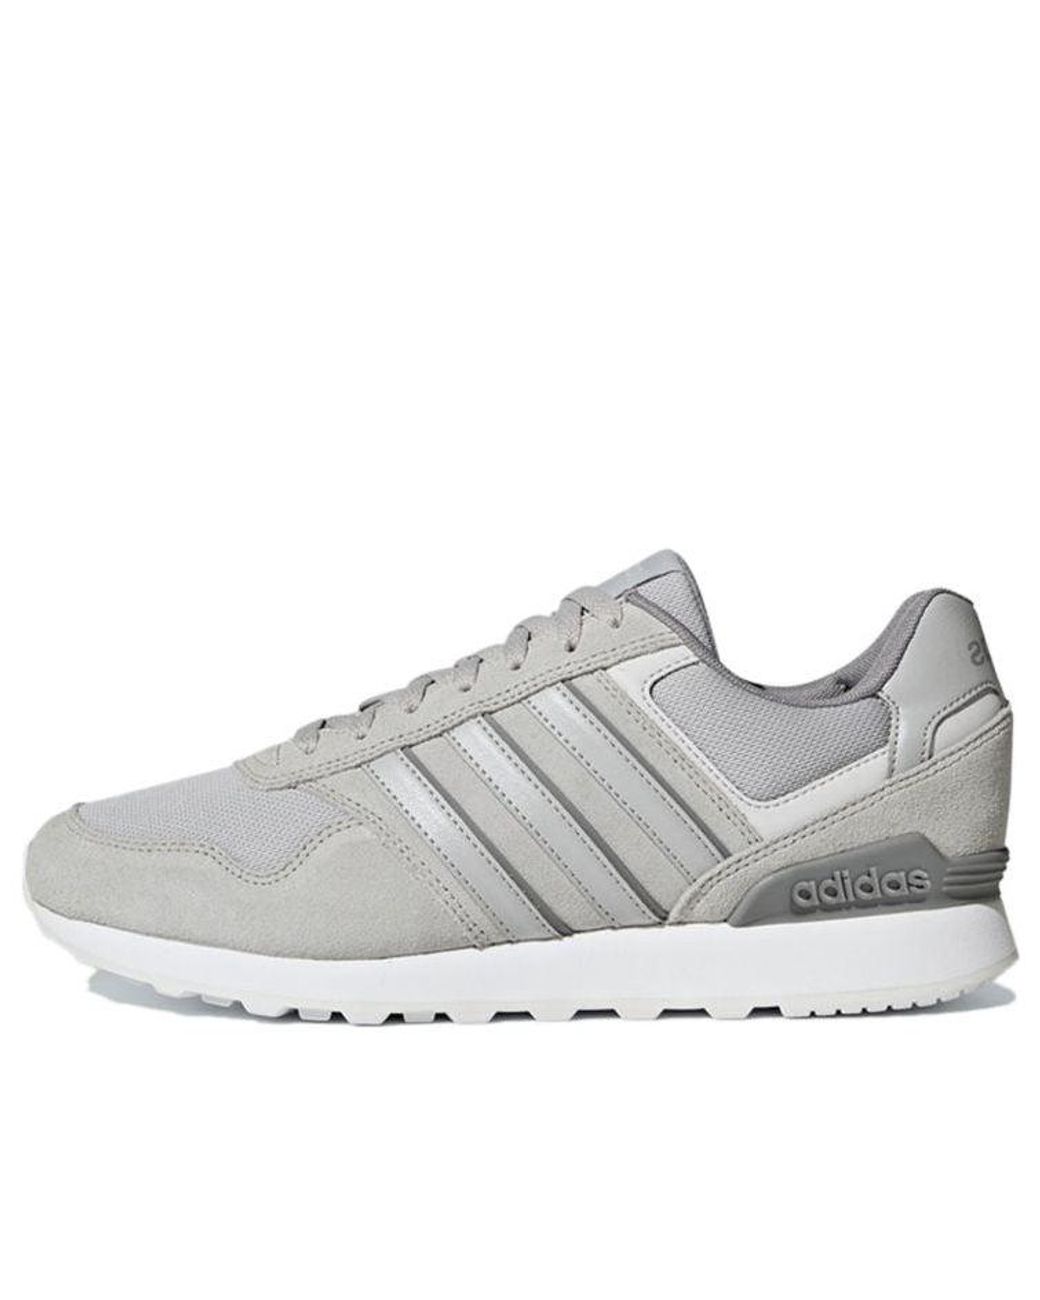 Adidas Neo 10k White' for Lyst